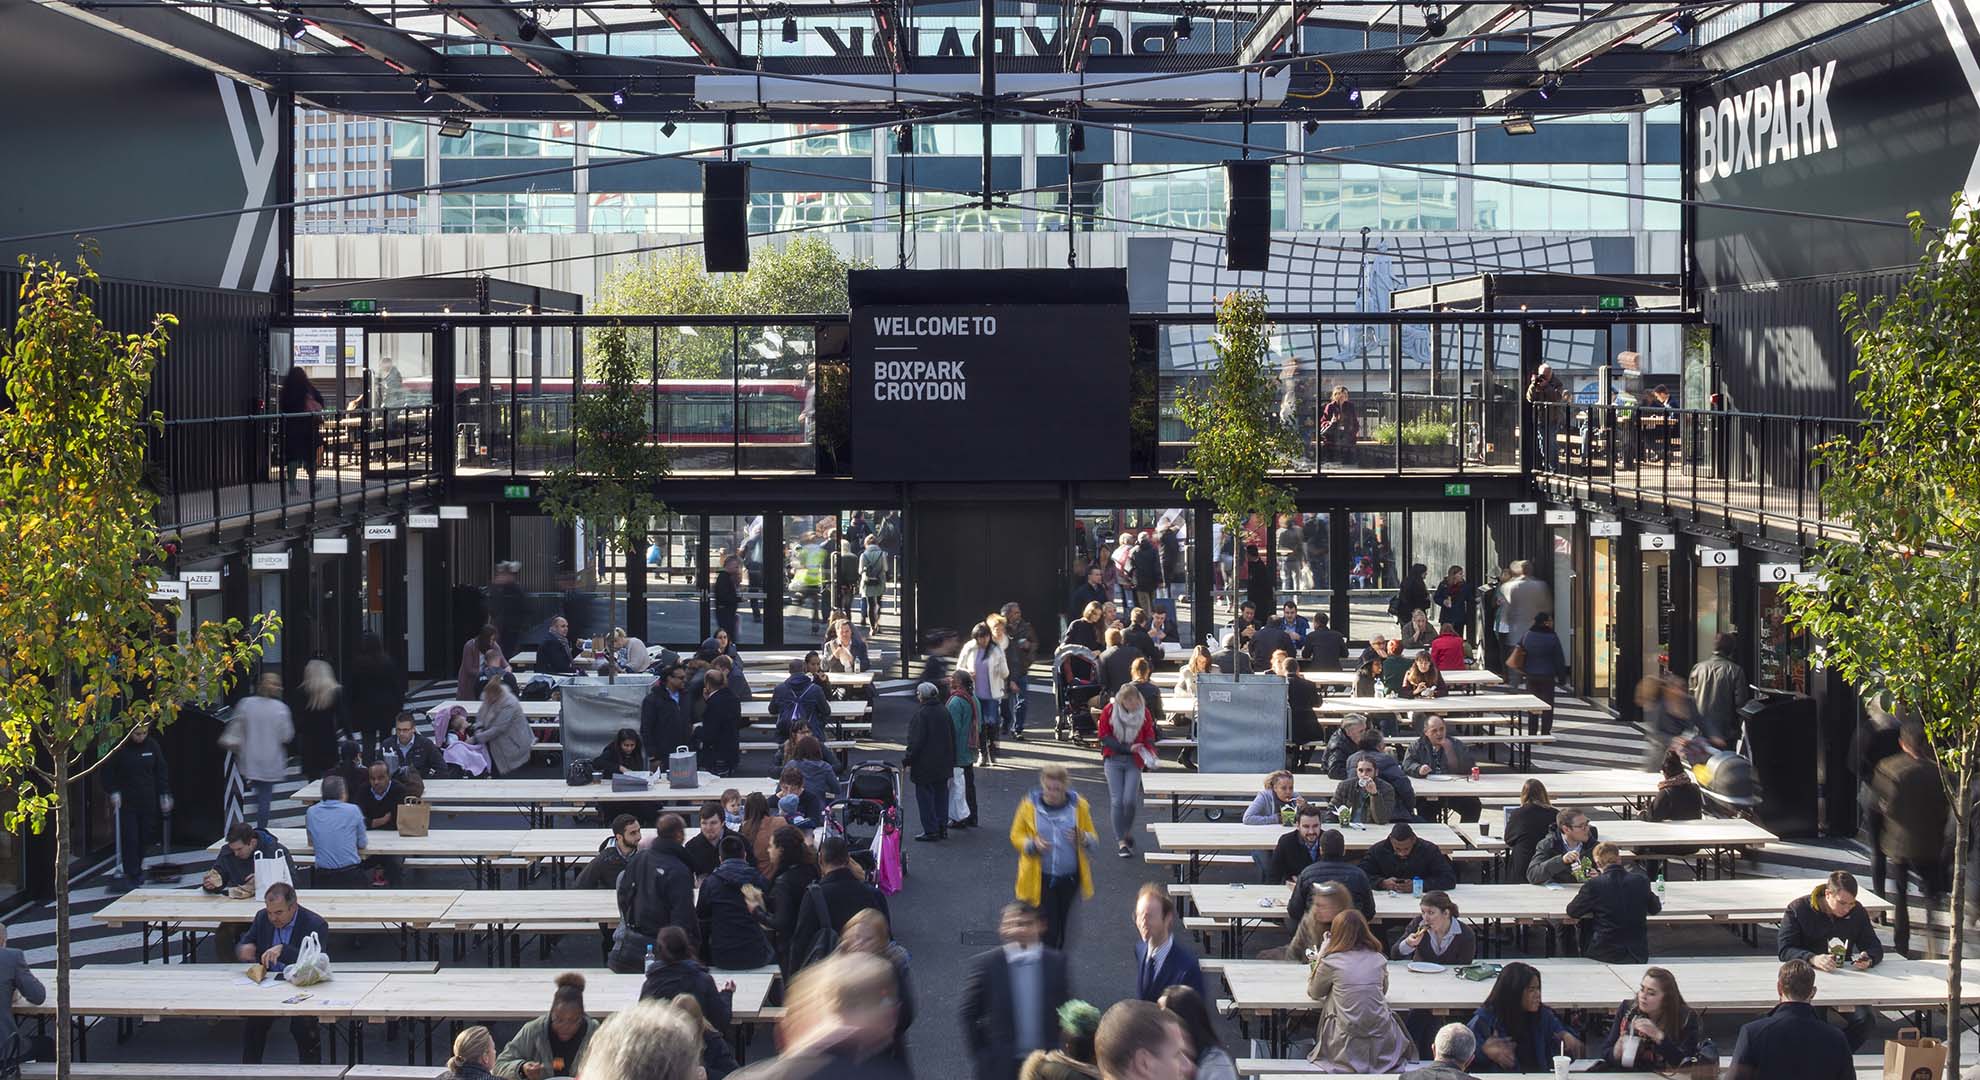 A café in Boxpark, Croydon, UK – a retail and food market made of shipping containers. Image by Nick Caville